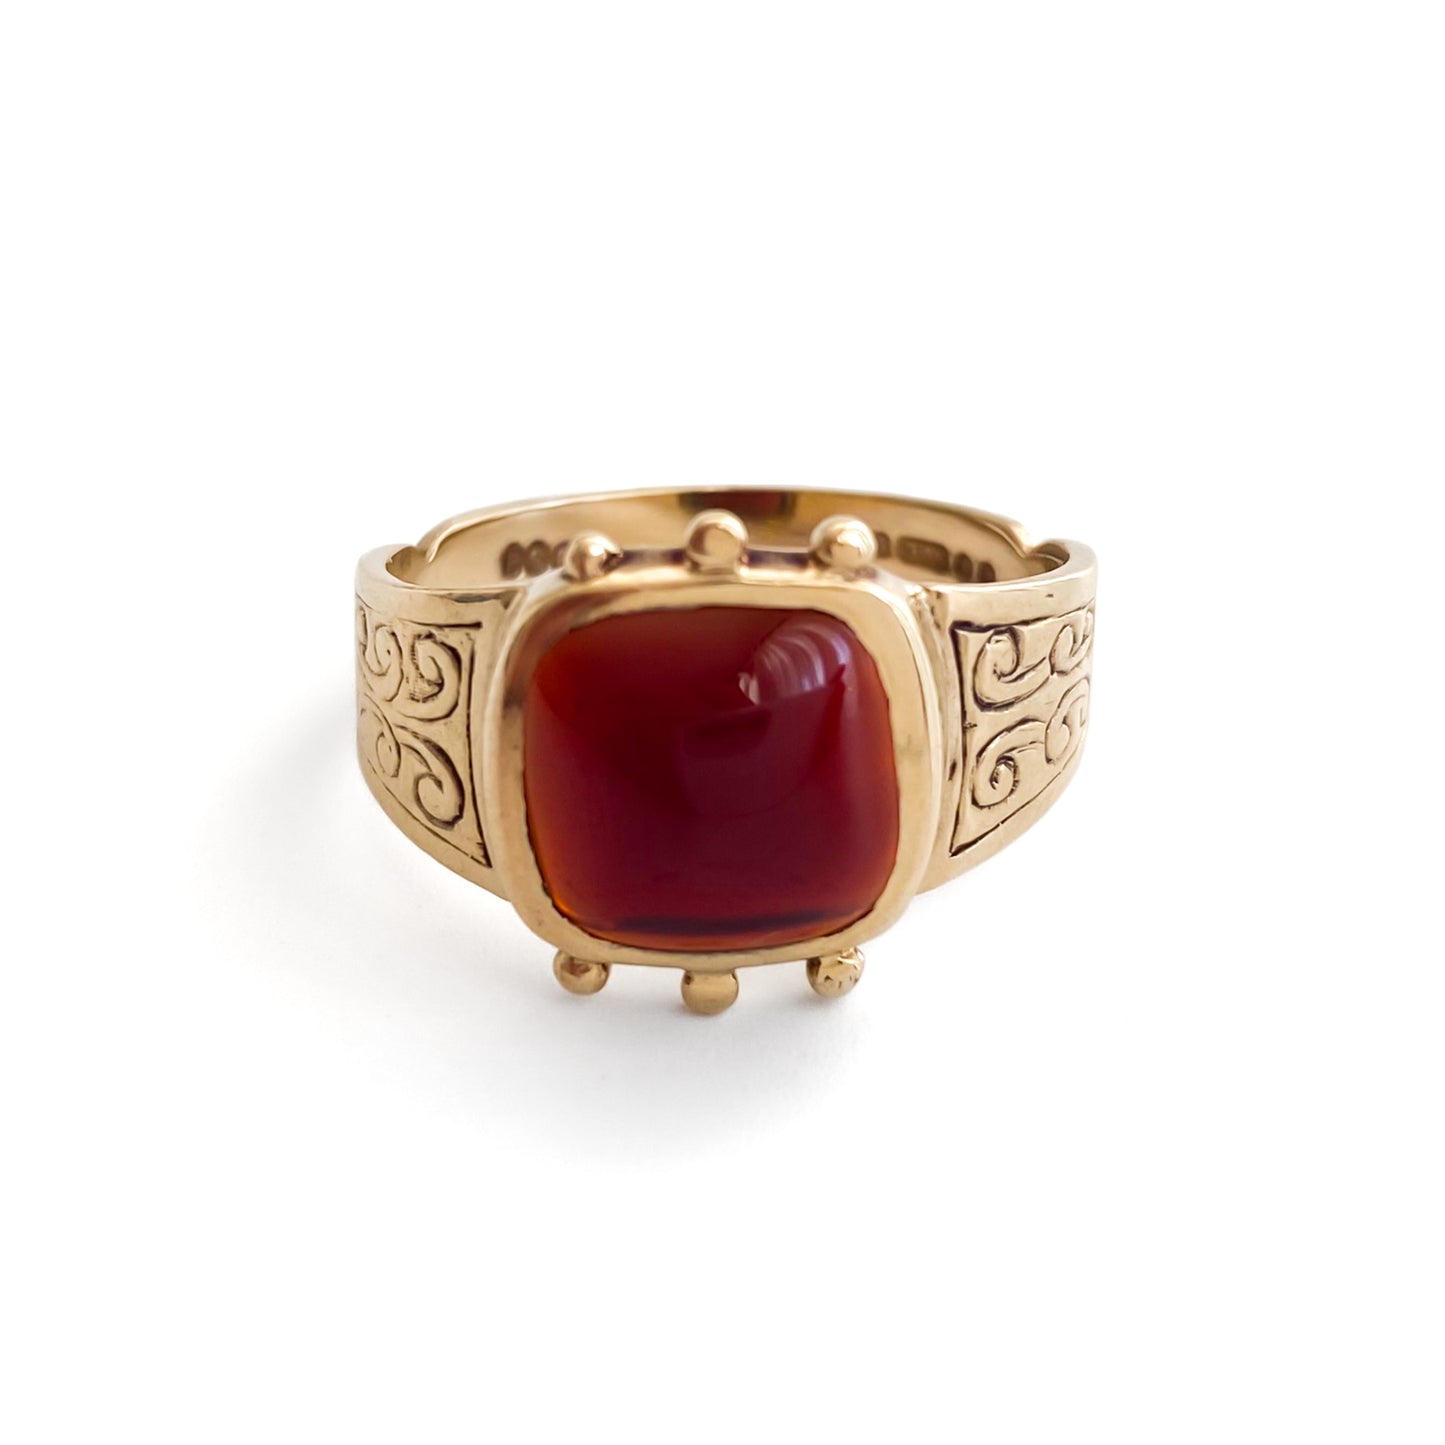 Edwardian 9ct gold ring with beautifully engraved shoulders and a deep red cabochon garnet. London